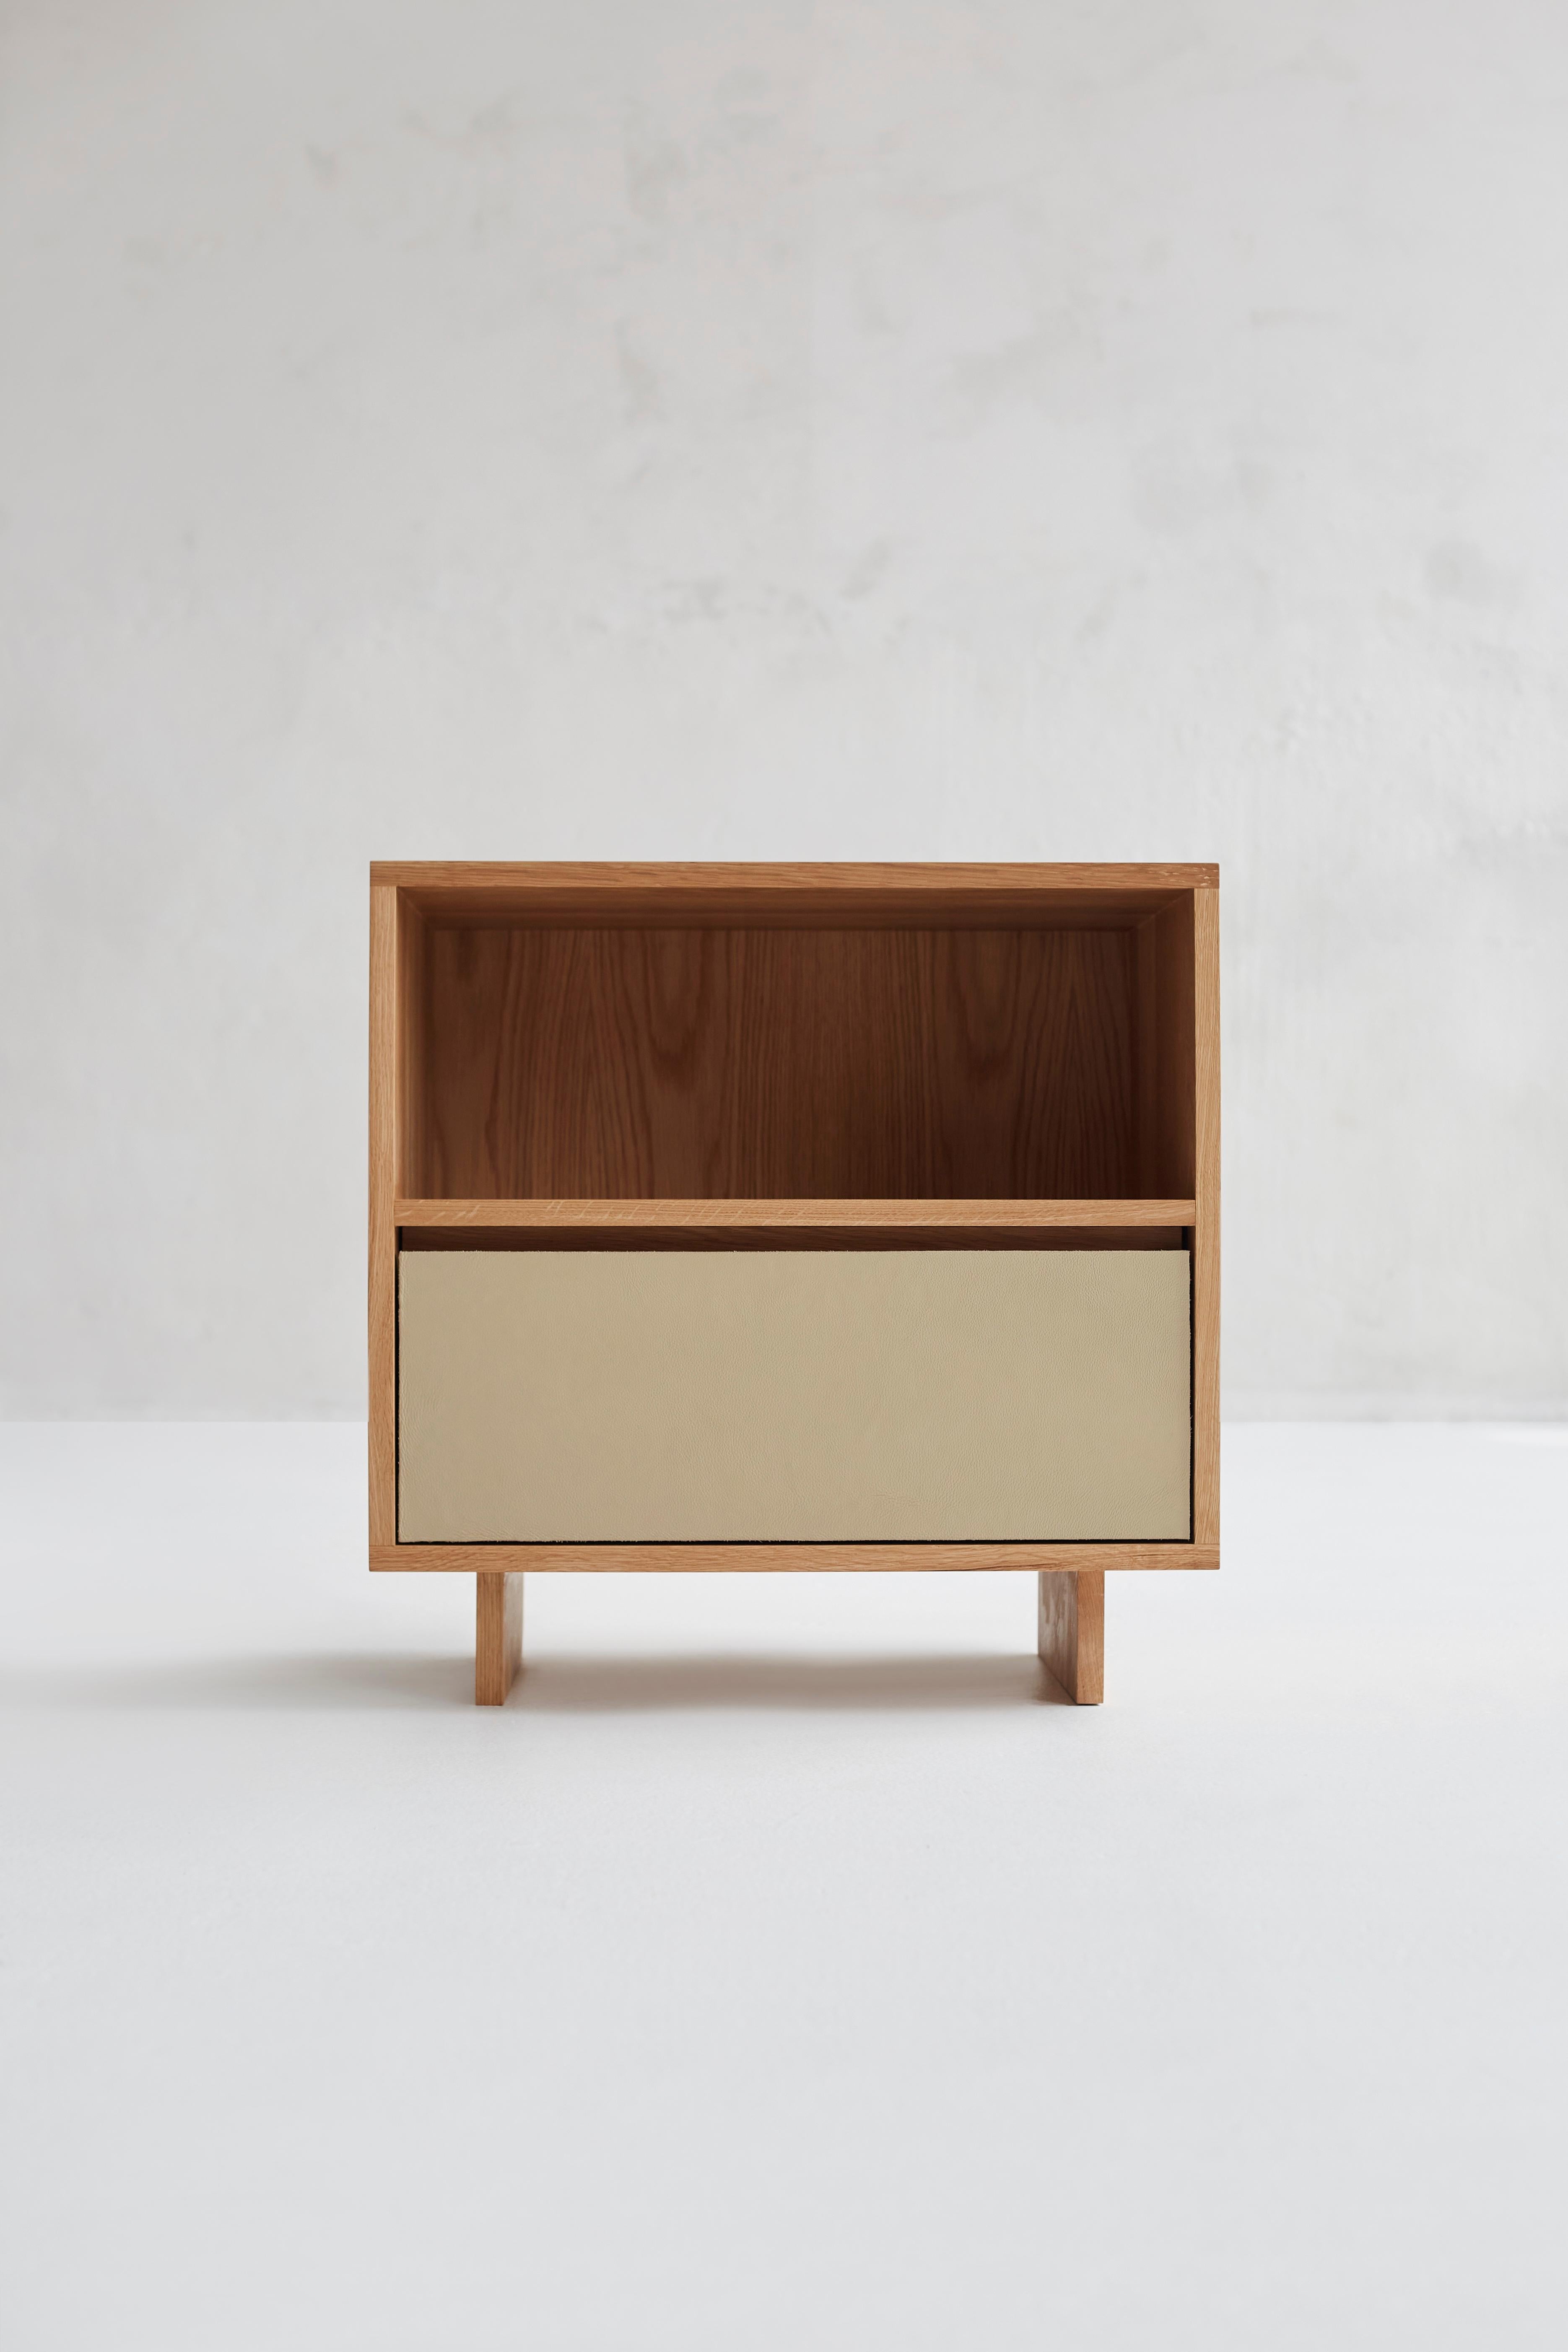 Combining white oak and leather our Follis Nightstand creates a classic yet contemporary bedside solution. A single leather-fronted drawer provides concealed storage, while the open compartment and surface allow for easy access to frequently used